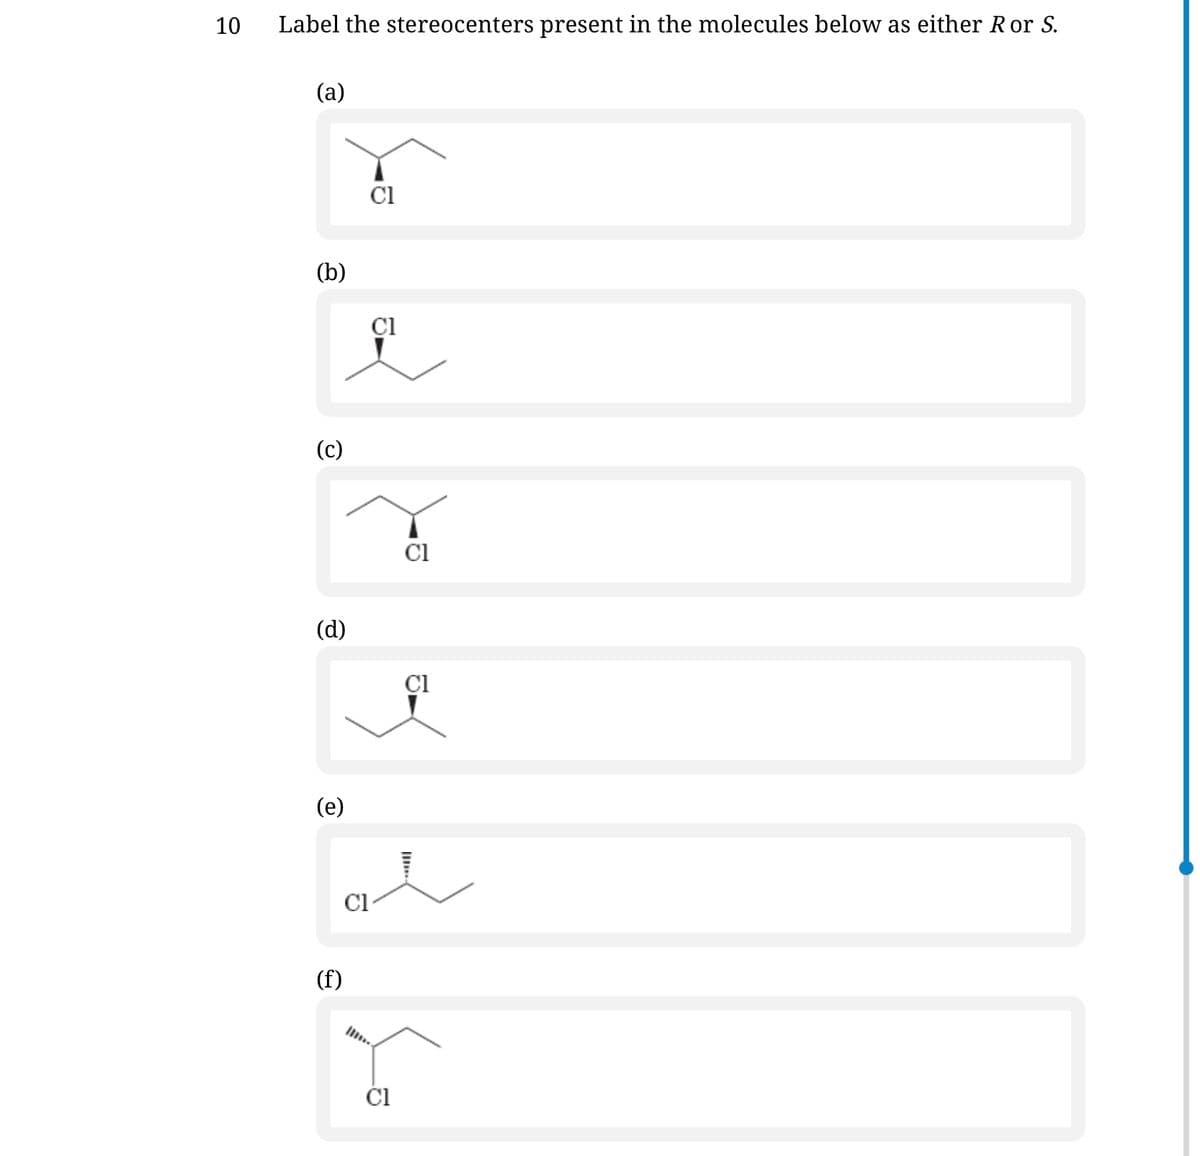 10
Label the stereocenters present in the molecules below as either Ror S.
(a)
Cl
(b)
Cl
(c)
Cl
(d)
Cl
(e)
Cl
(f)
